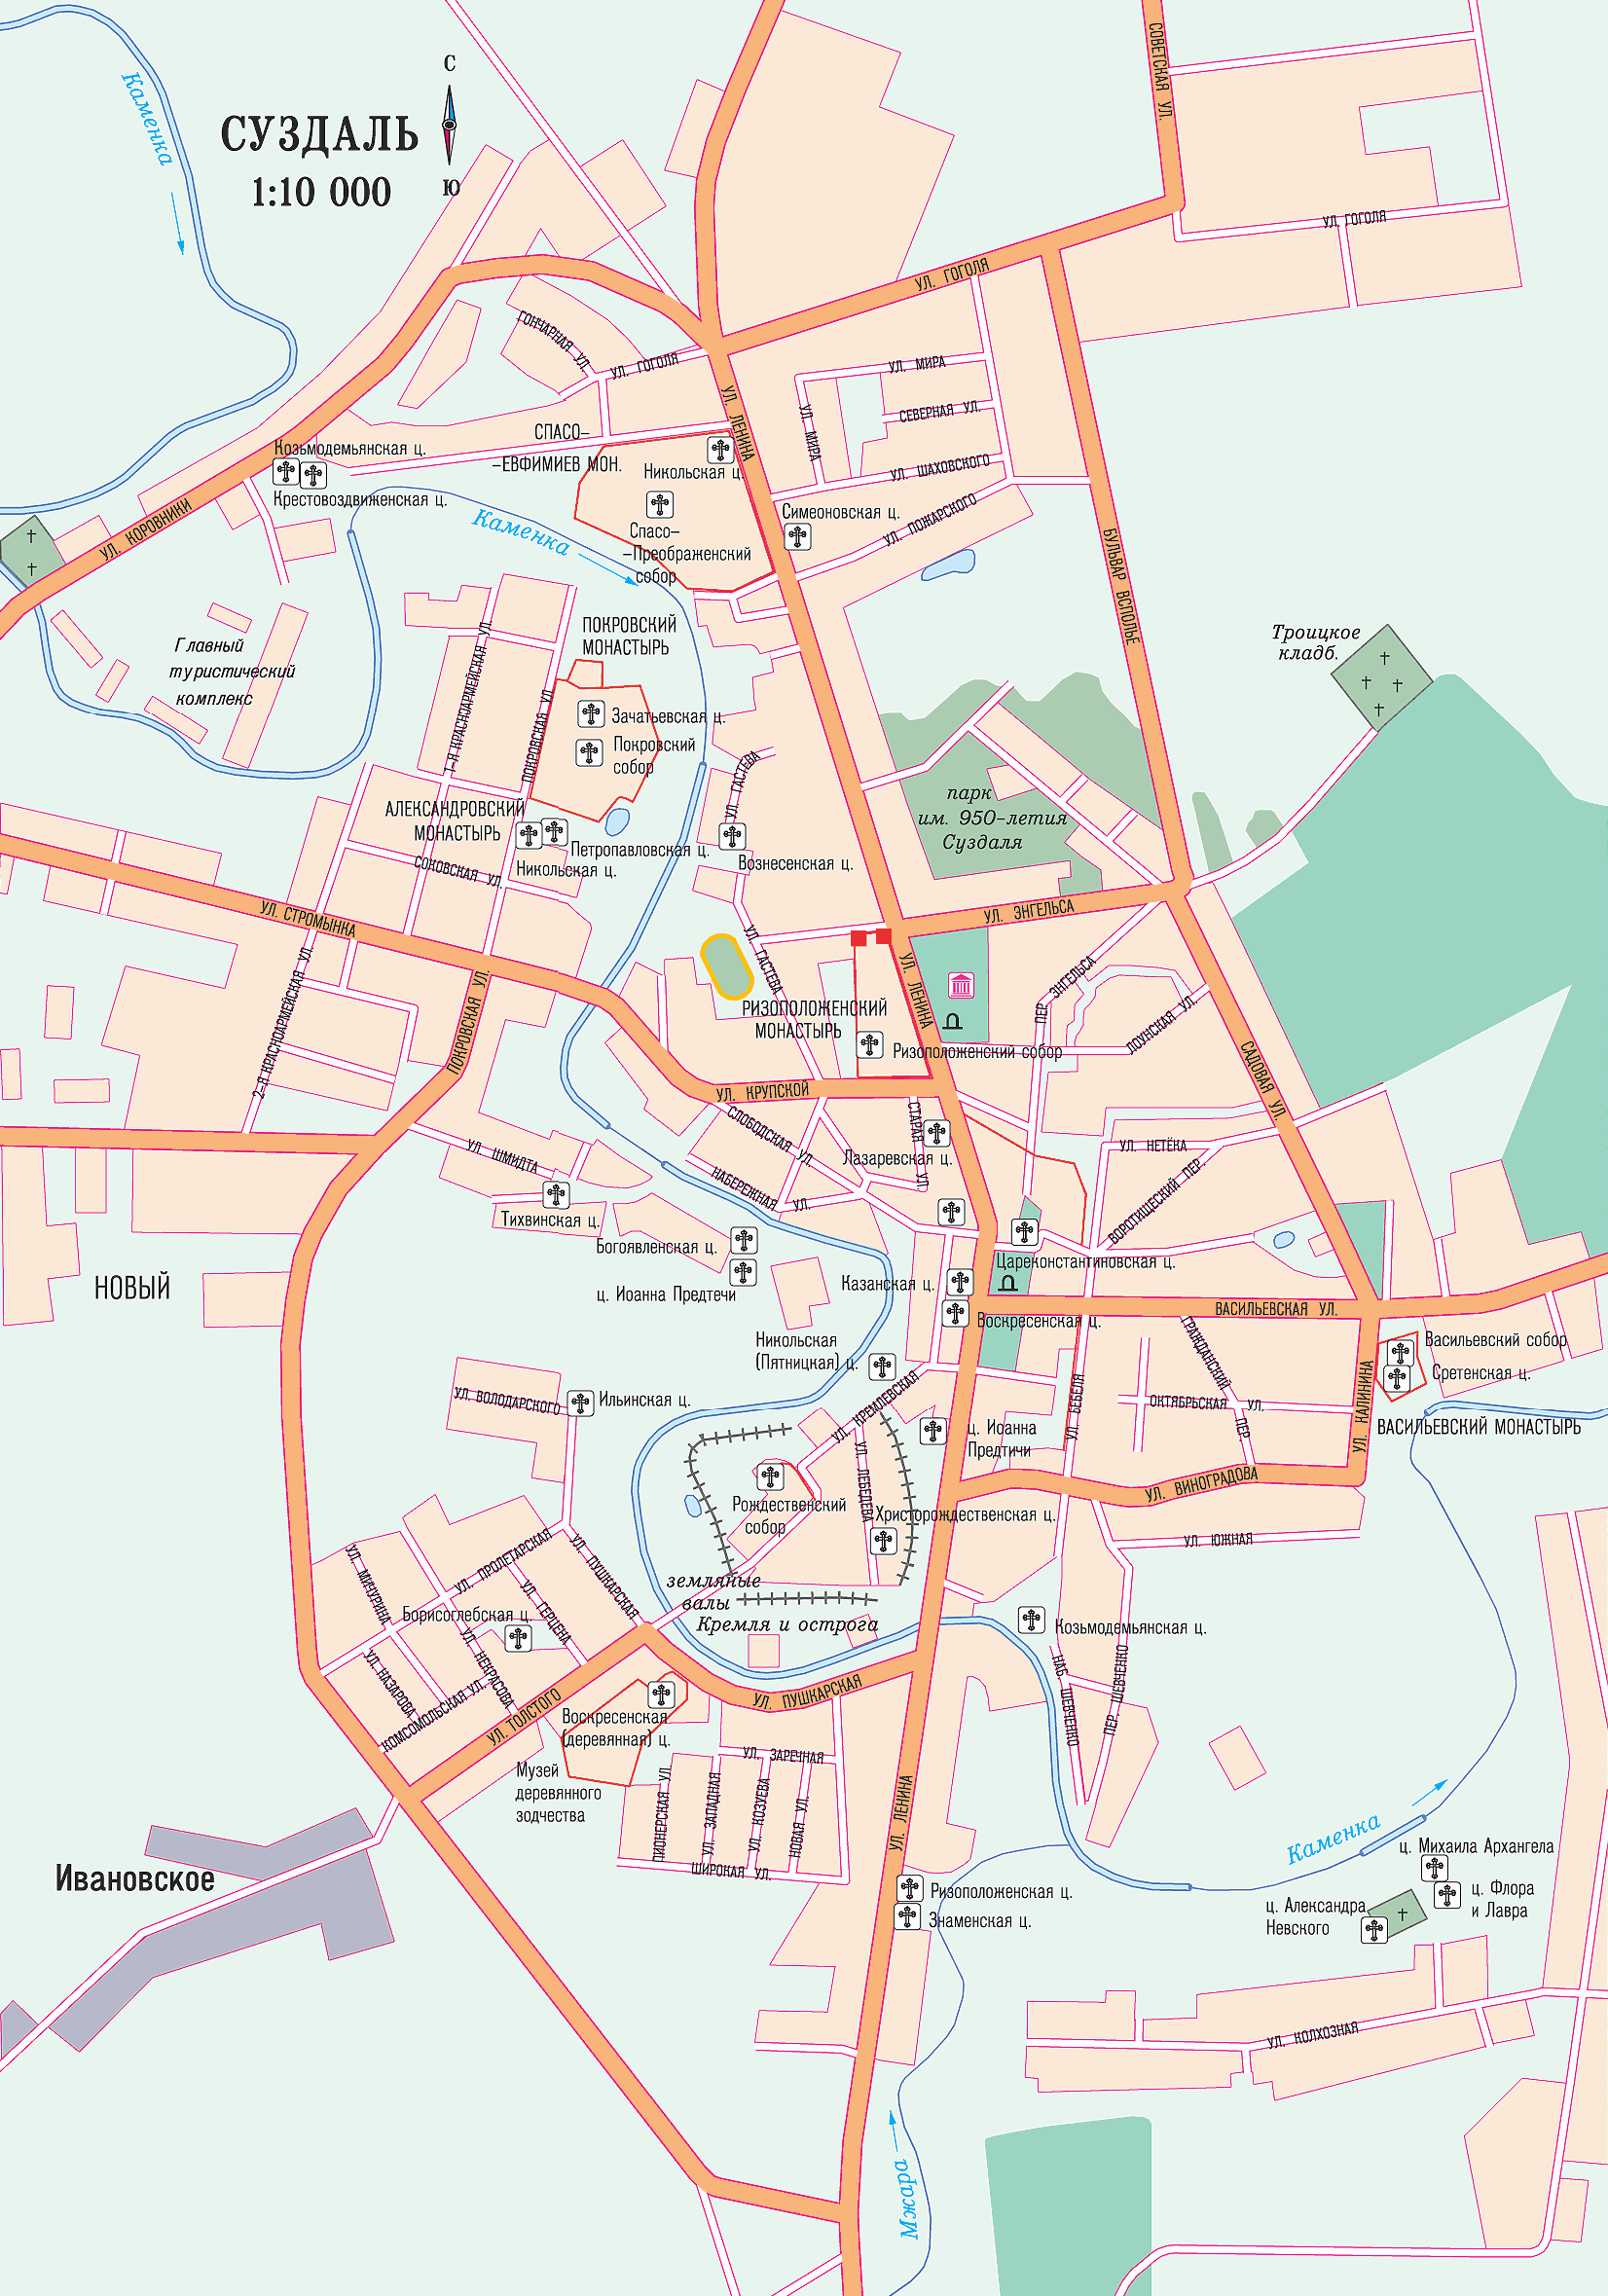 Map of Suzdal